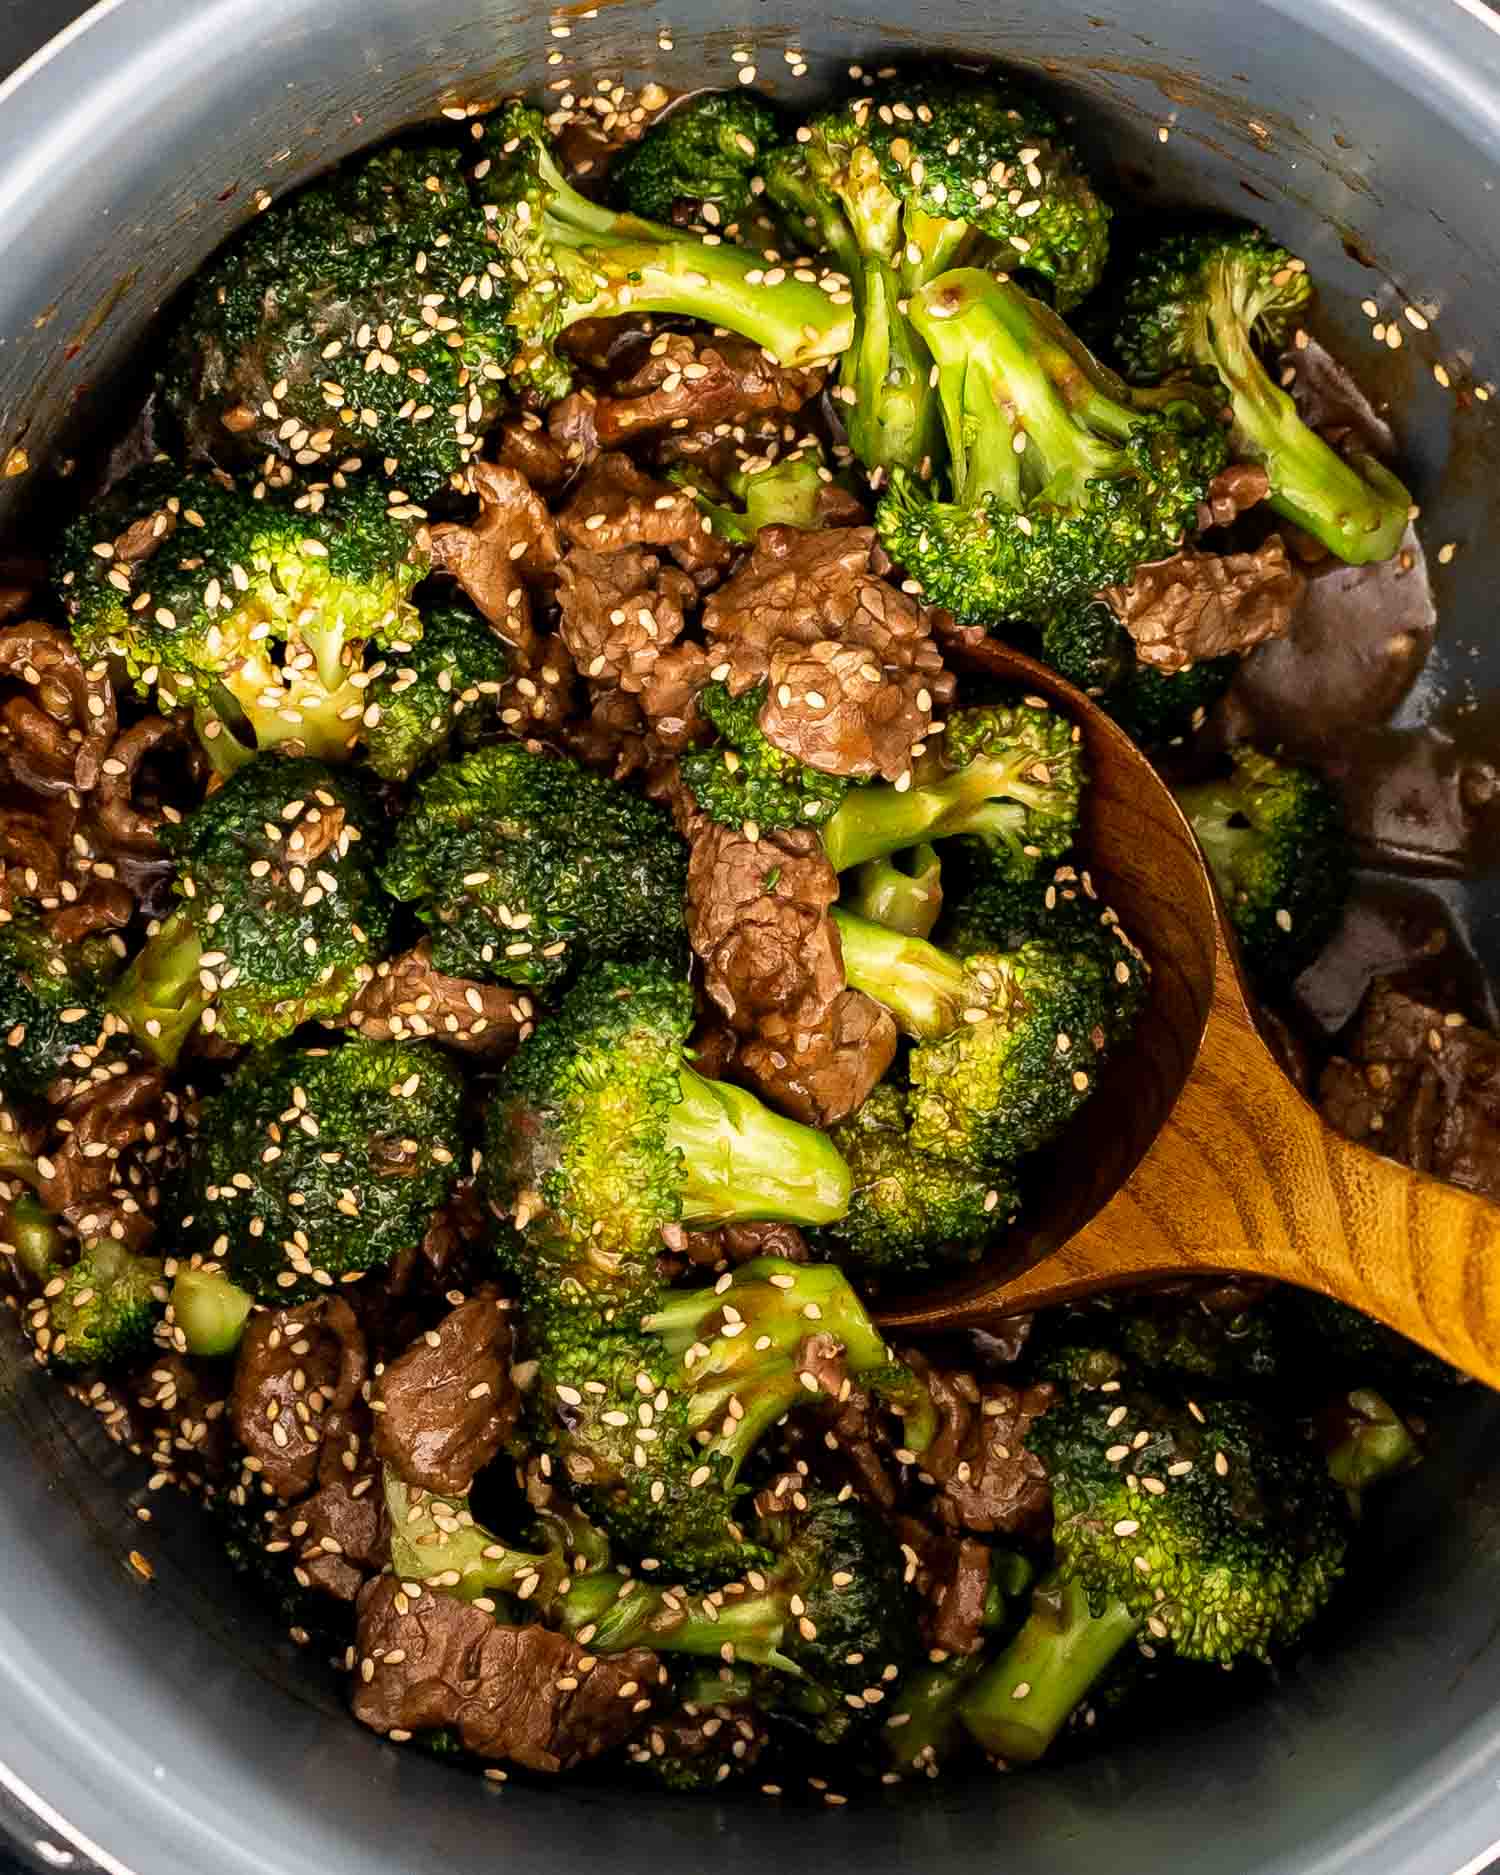 freshly made beef and broccoli in an instant pot.